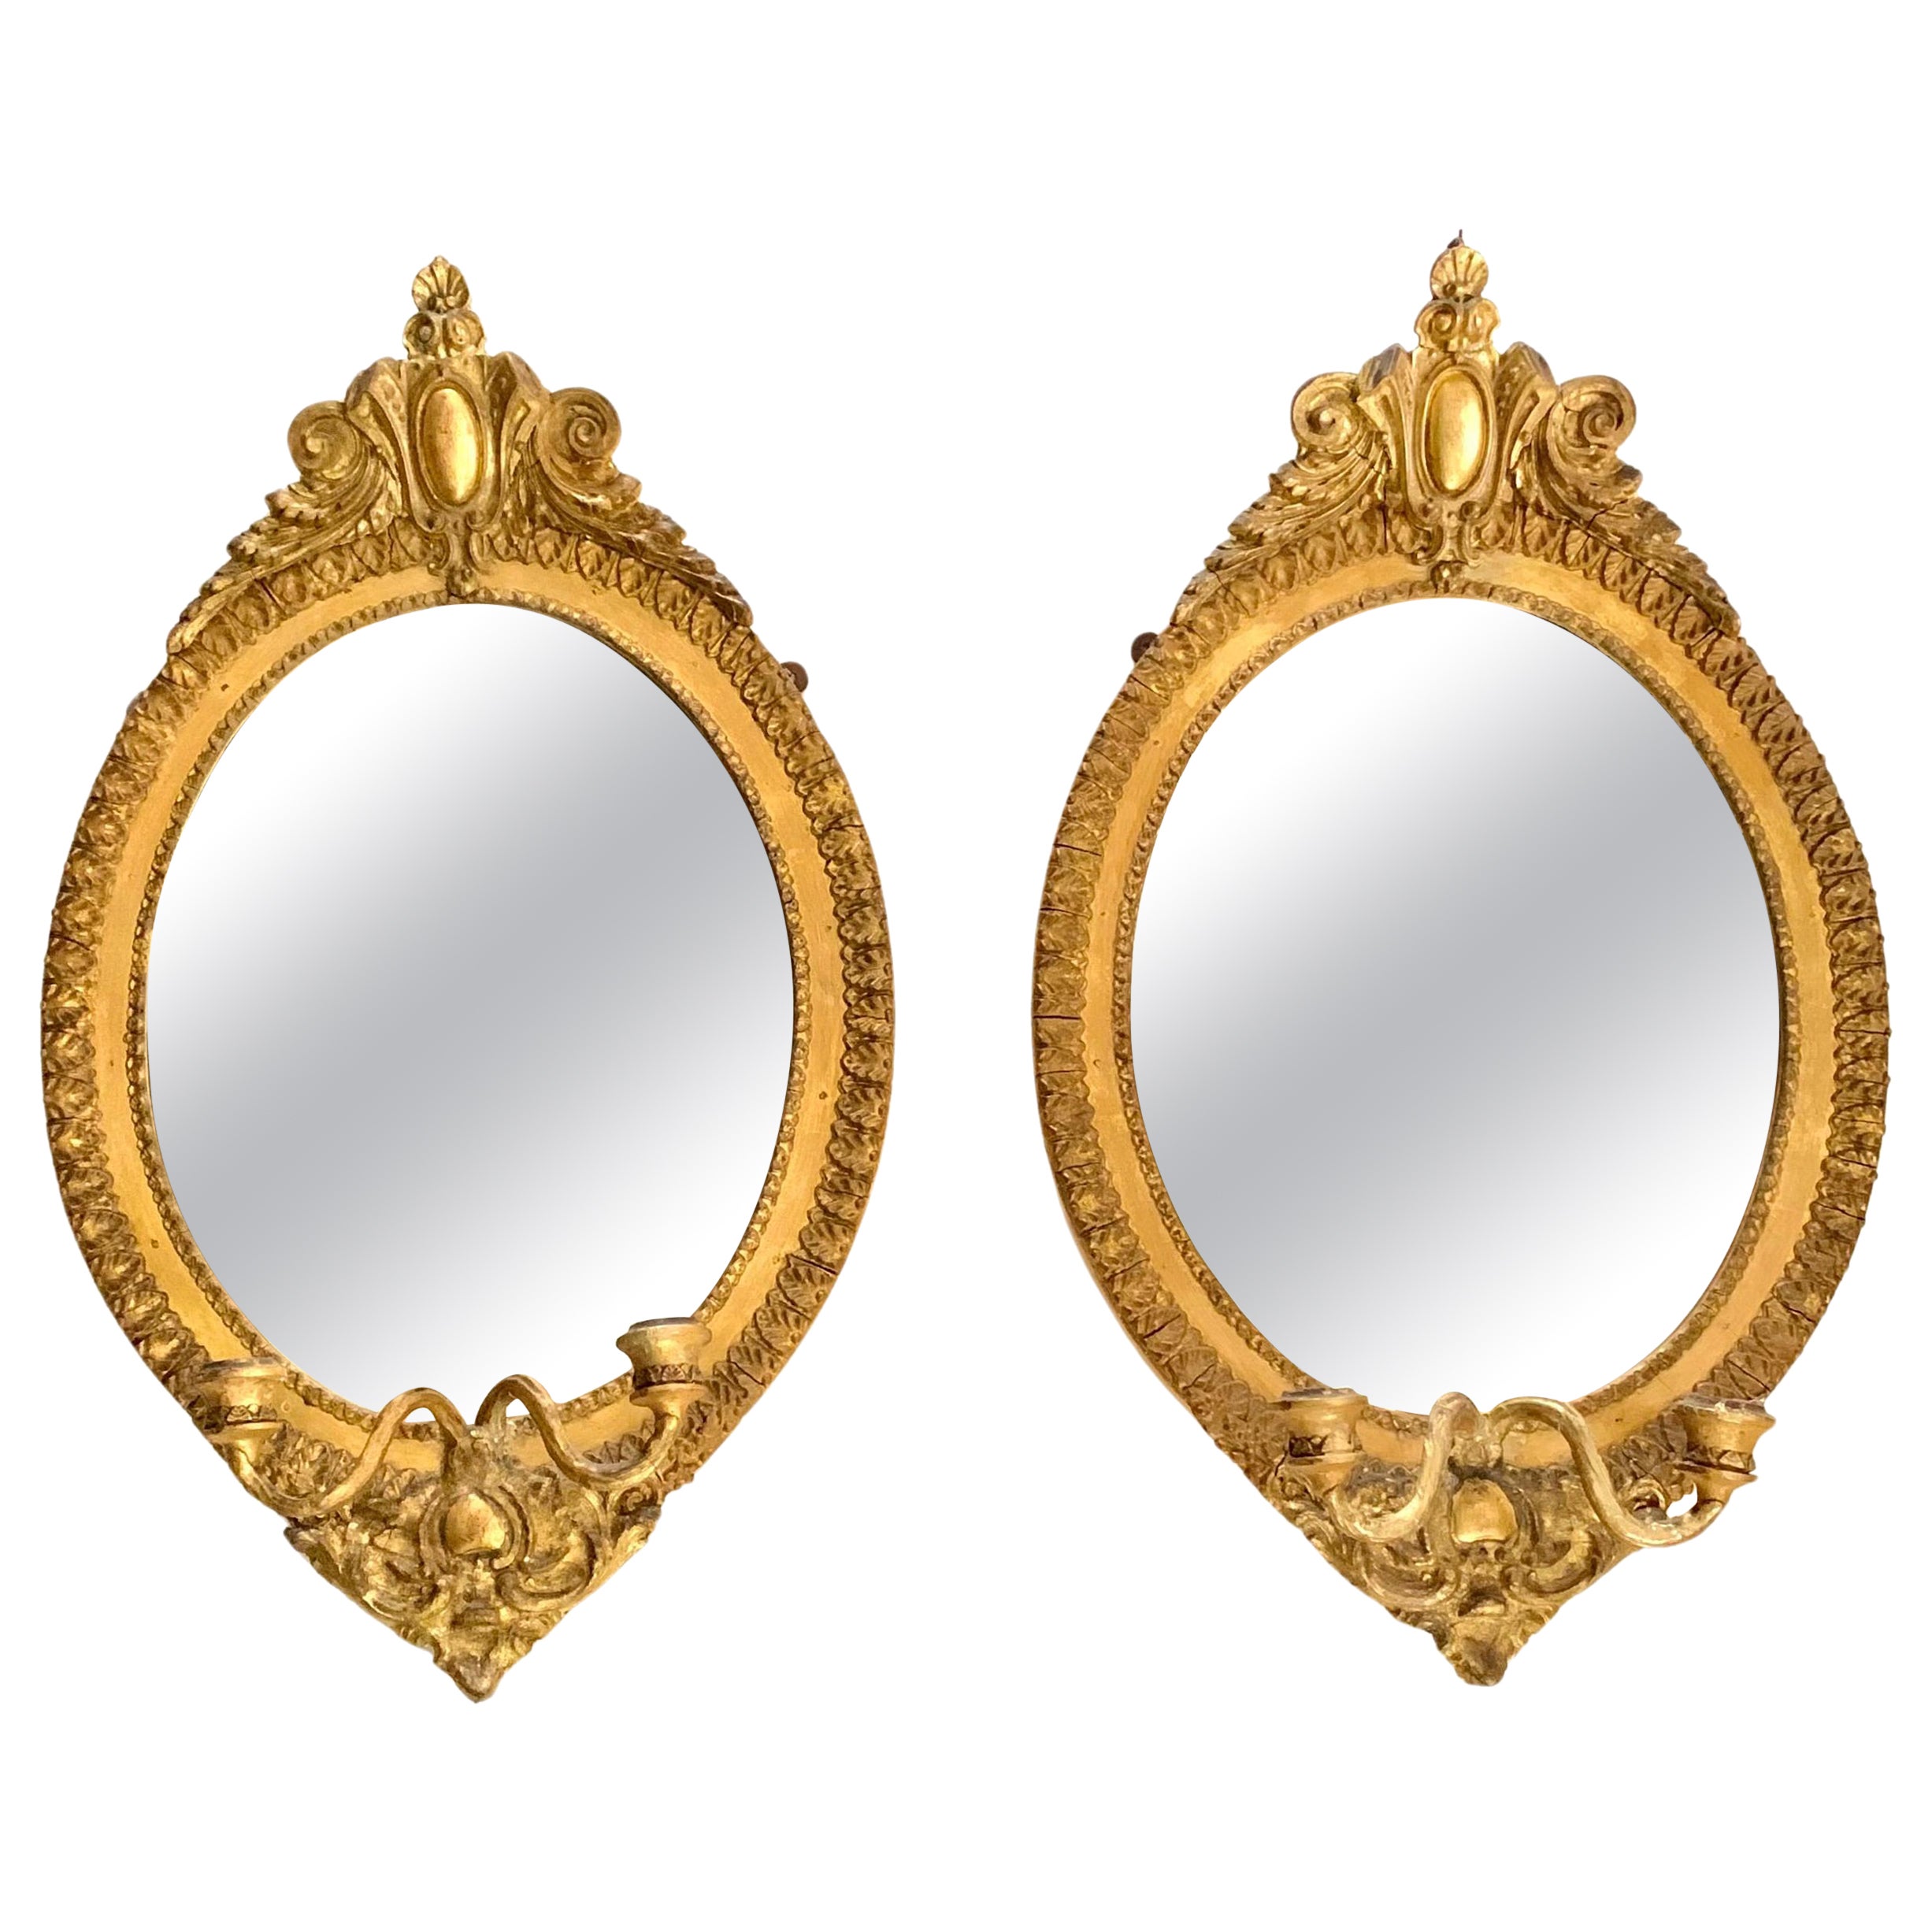 Pair 19th Century Neoclassical Style Giltwood Oval Girandole Mirrors